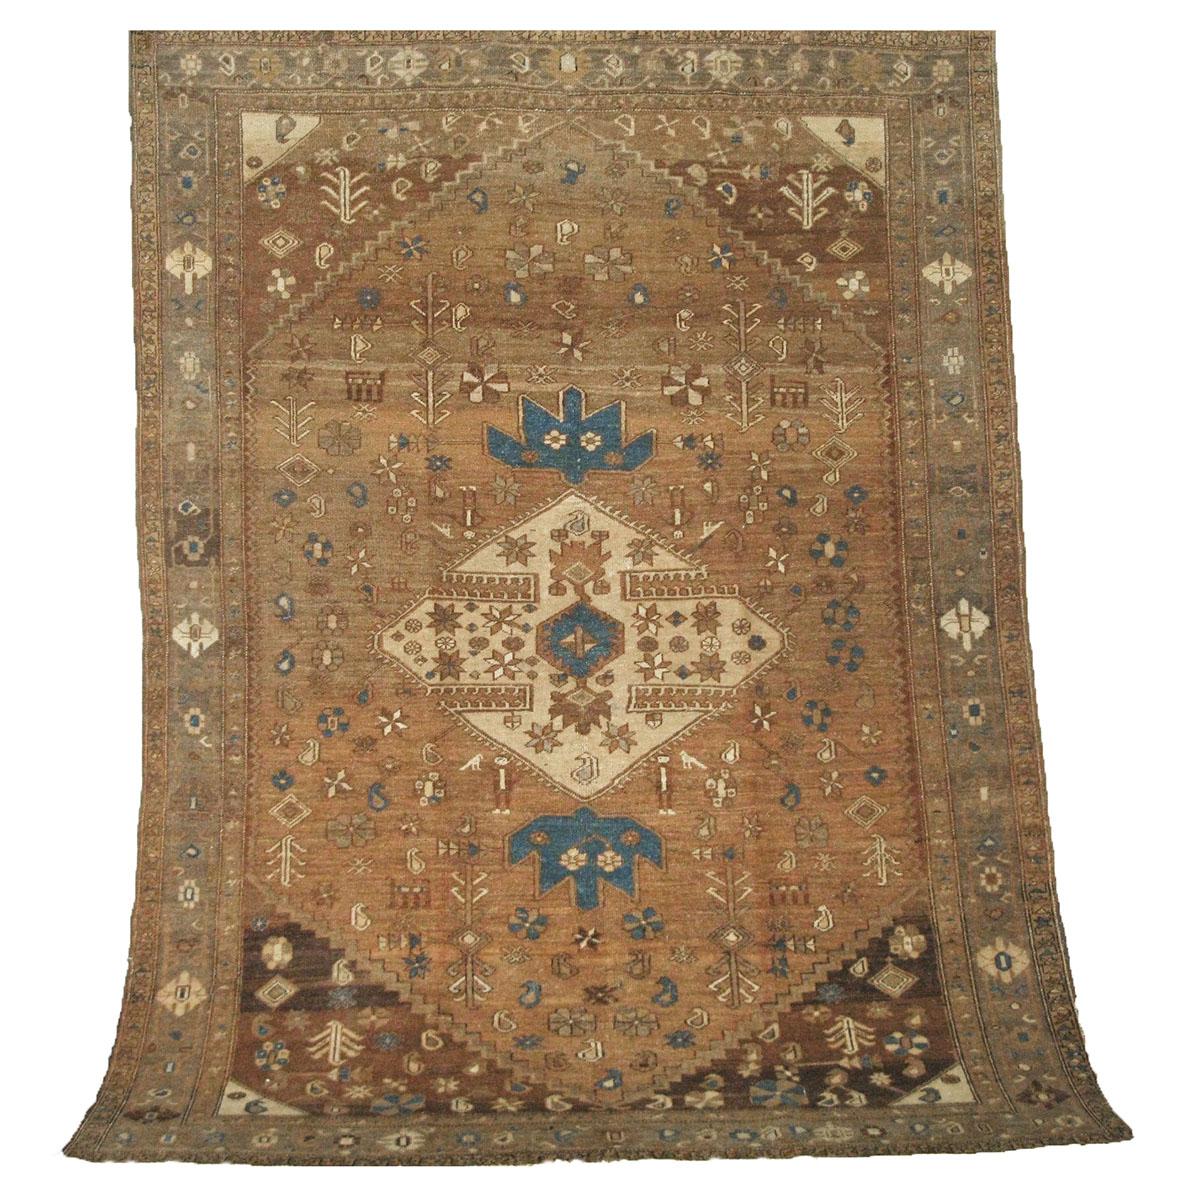 Ashly Fine Rugs presents an original Antique Persian Heriz area rug. Made with all vegetable-dyed, handspun wool and entirely handwoven. The pile of the rug is 1/4